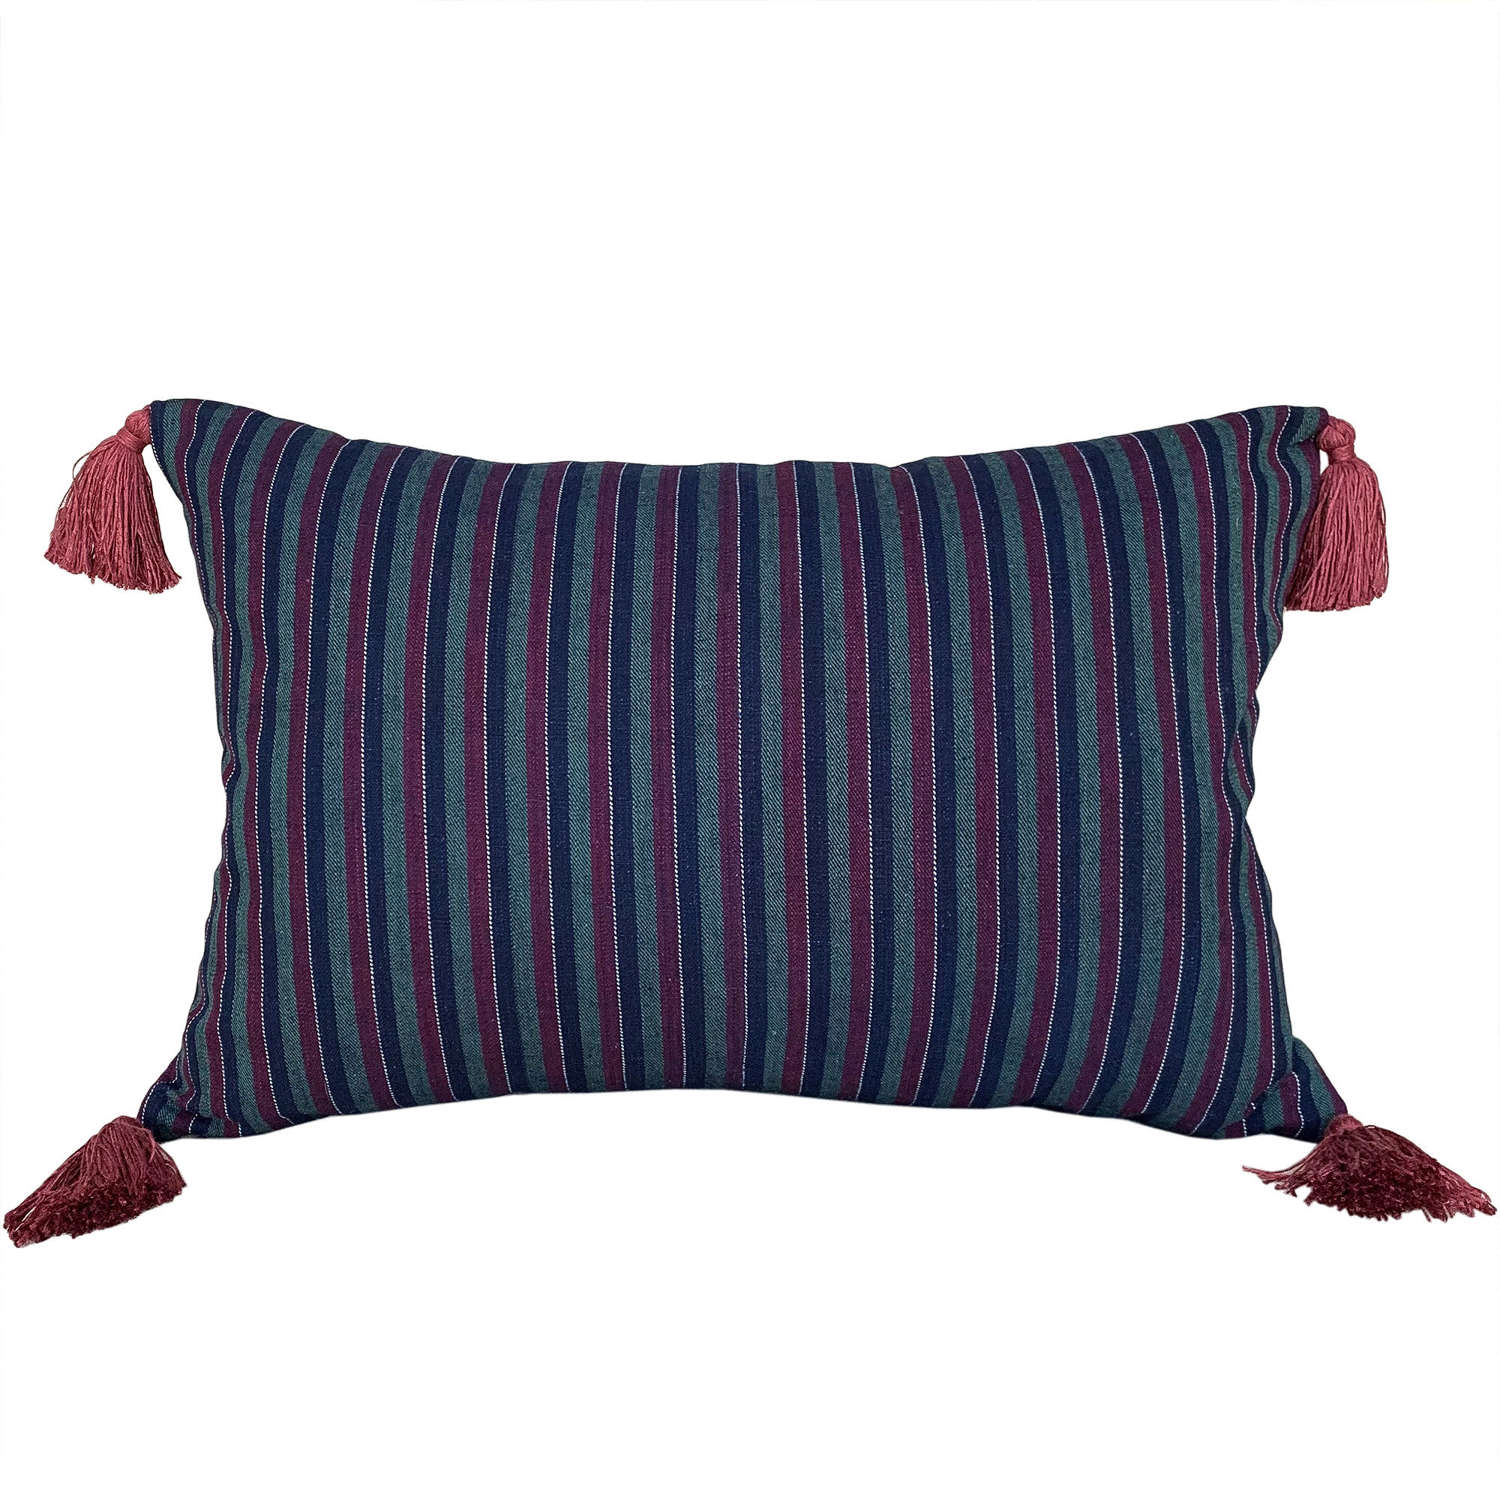 Songjiang Cushions With Tassels